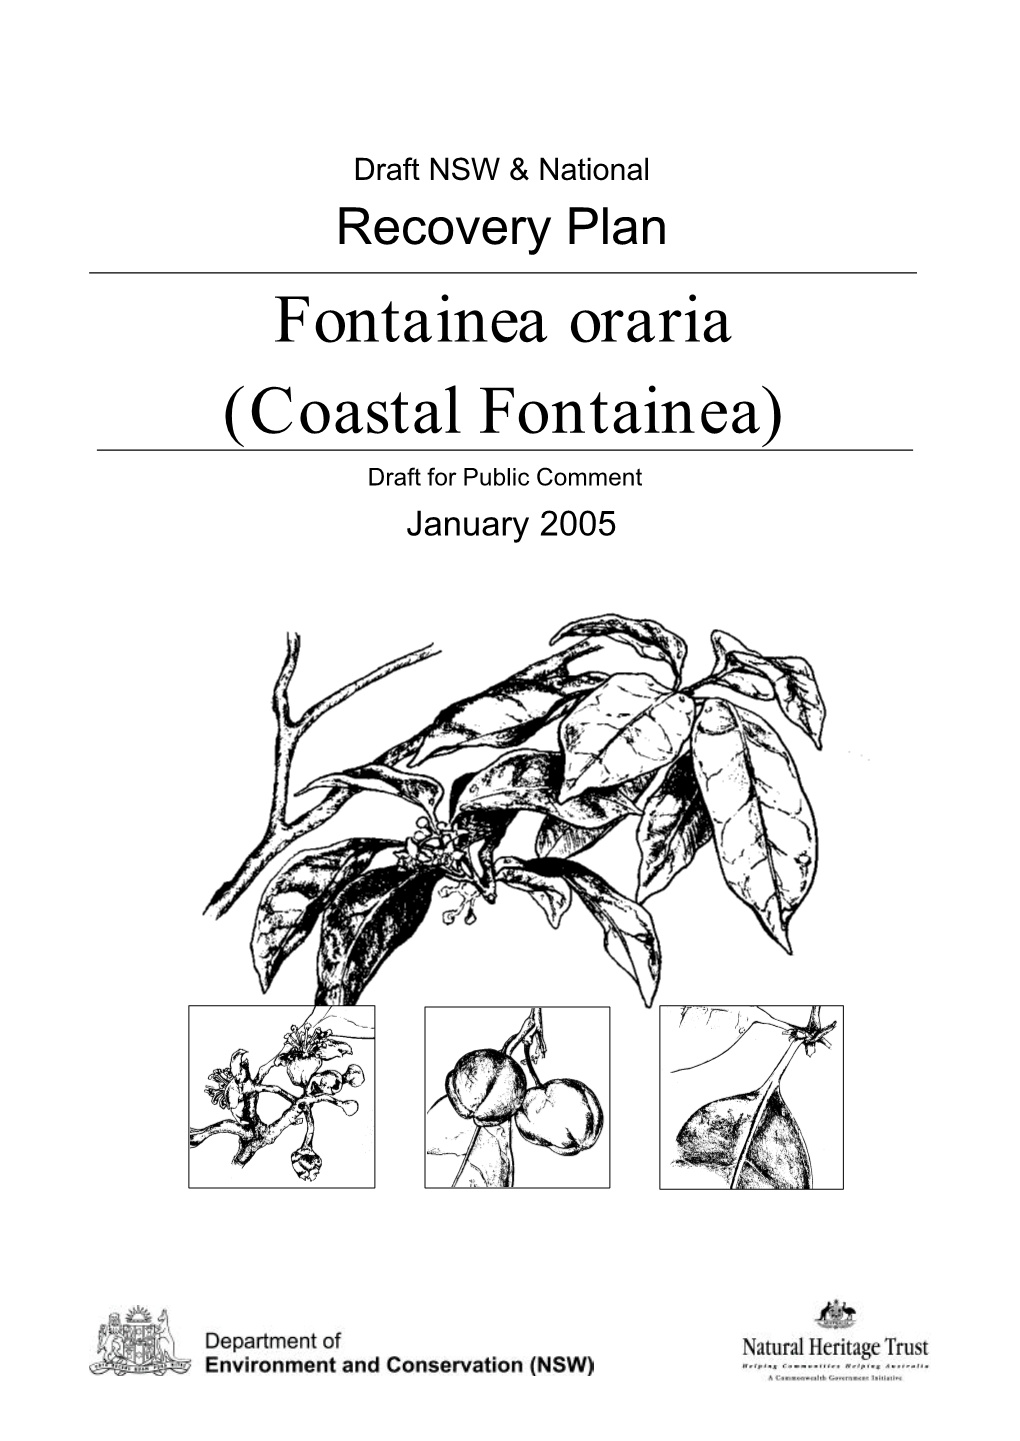 Fontainea Oraria (Coastal Fontainea) Draft for Public Comment January 2005 © NSW Department of Environment and Conservation, 2005